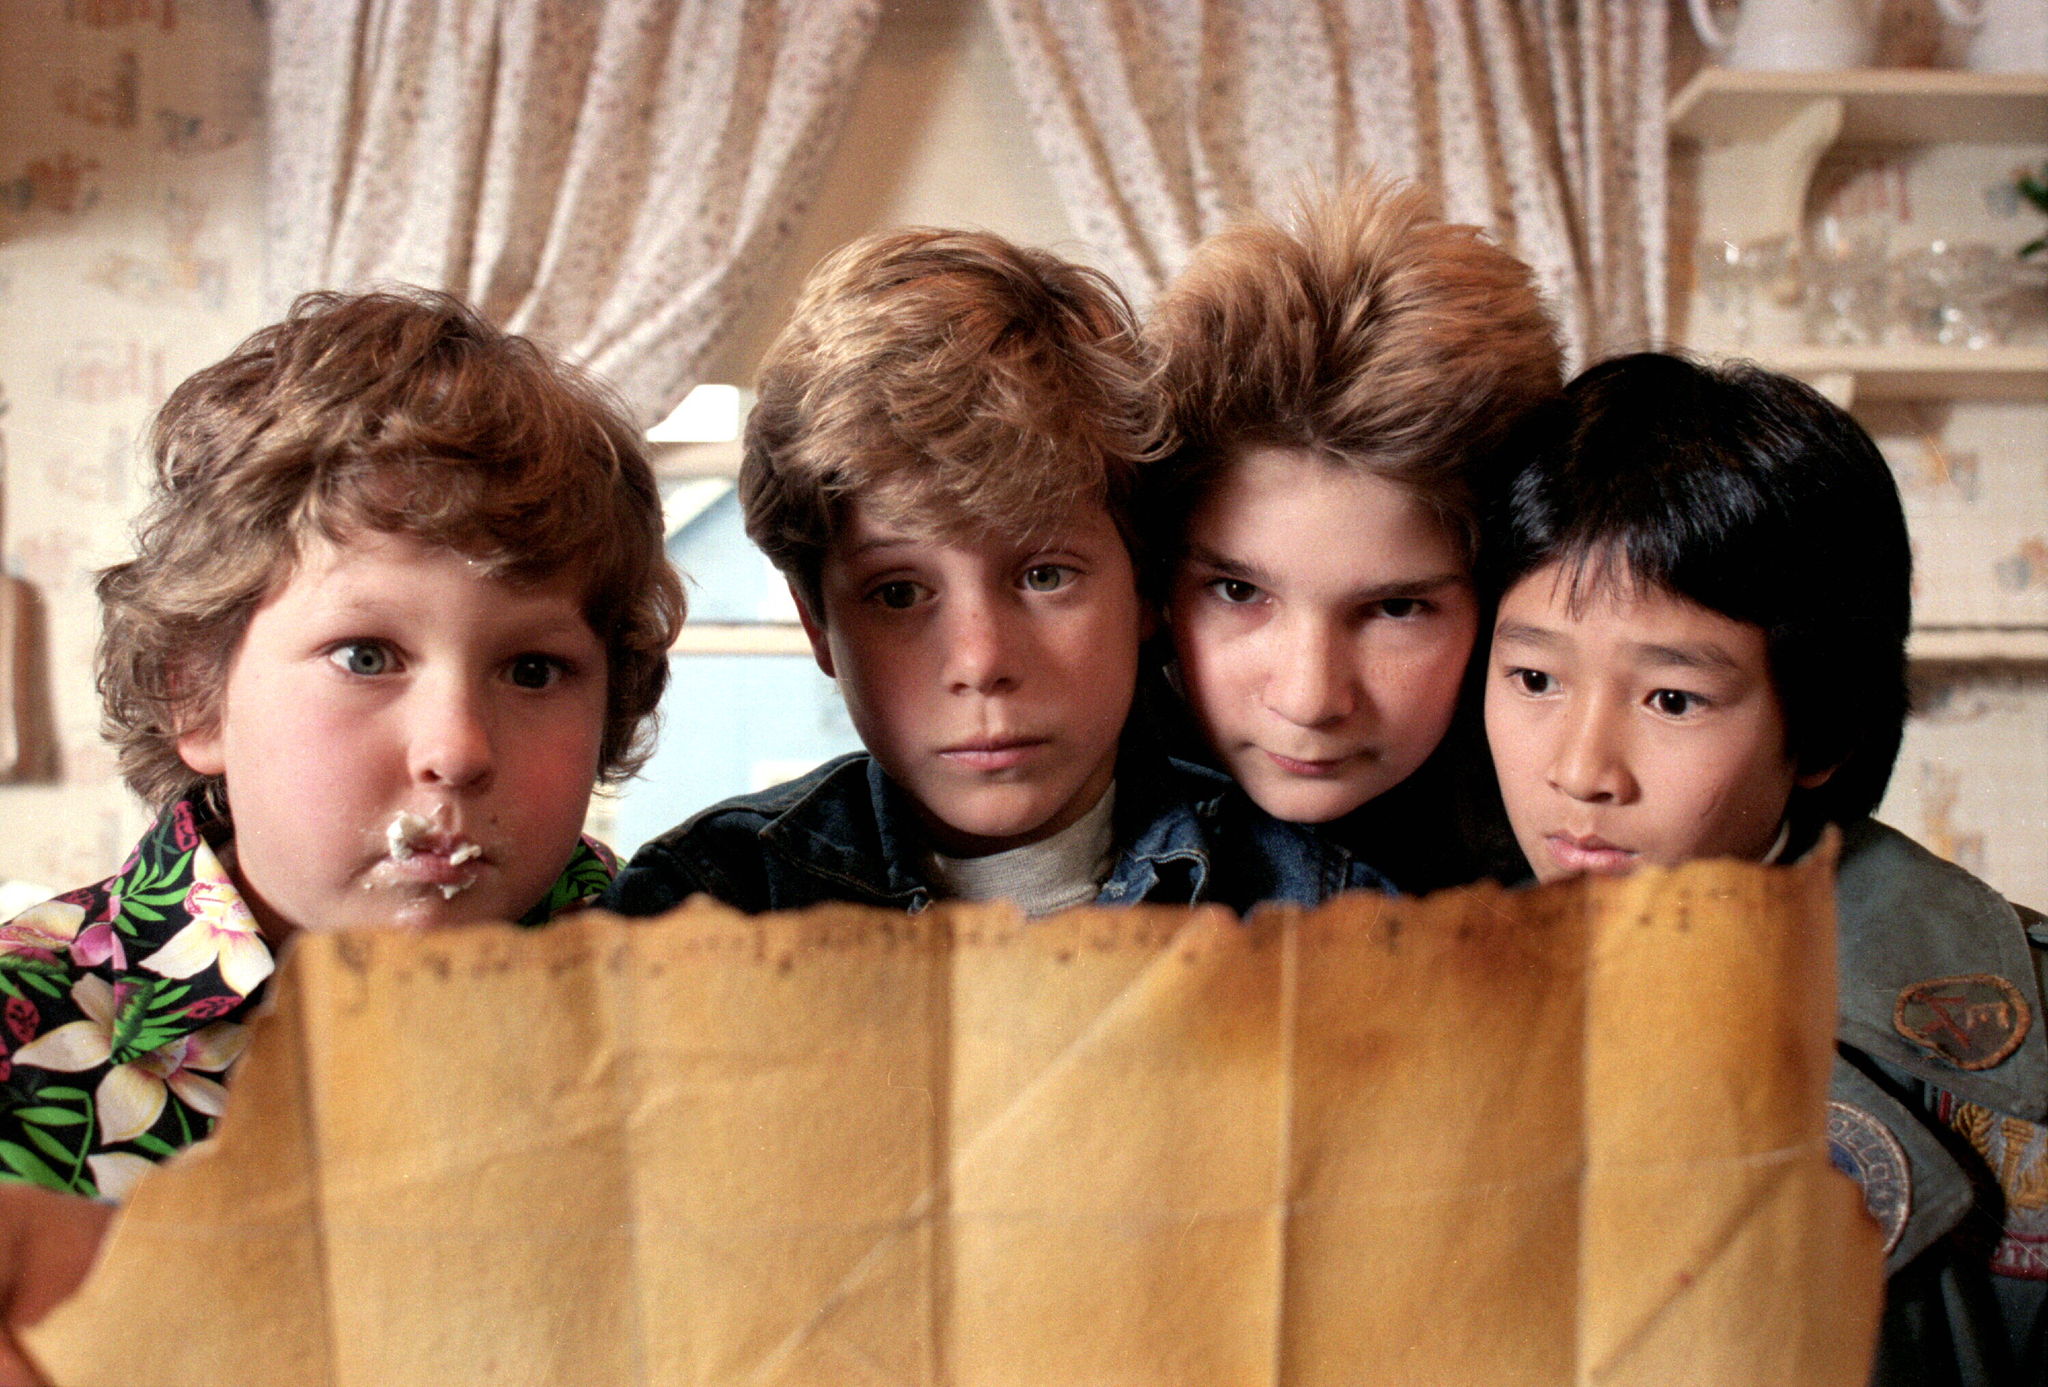 Sunset Cinema Begins Aug. 2 with The Goonies | Georgetown DC - Explore Georgetown in Washington, DC